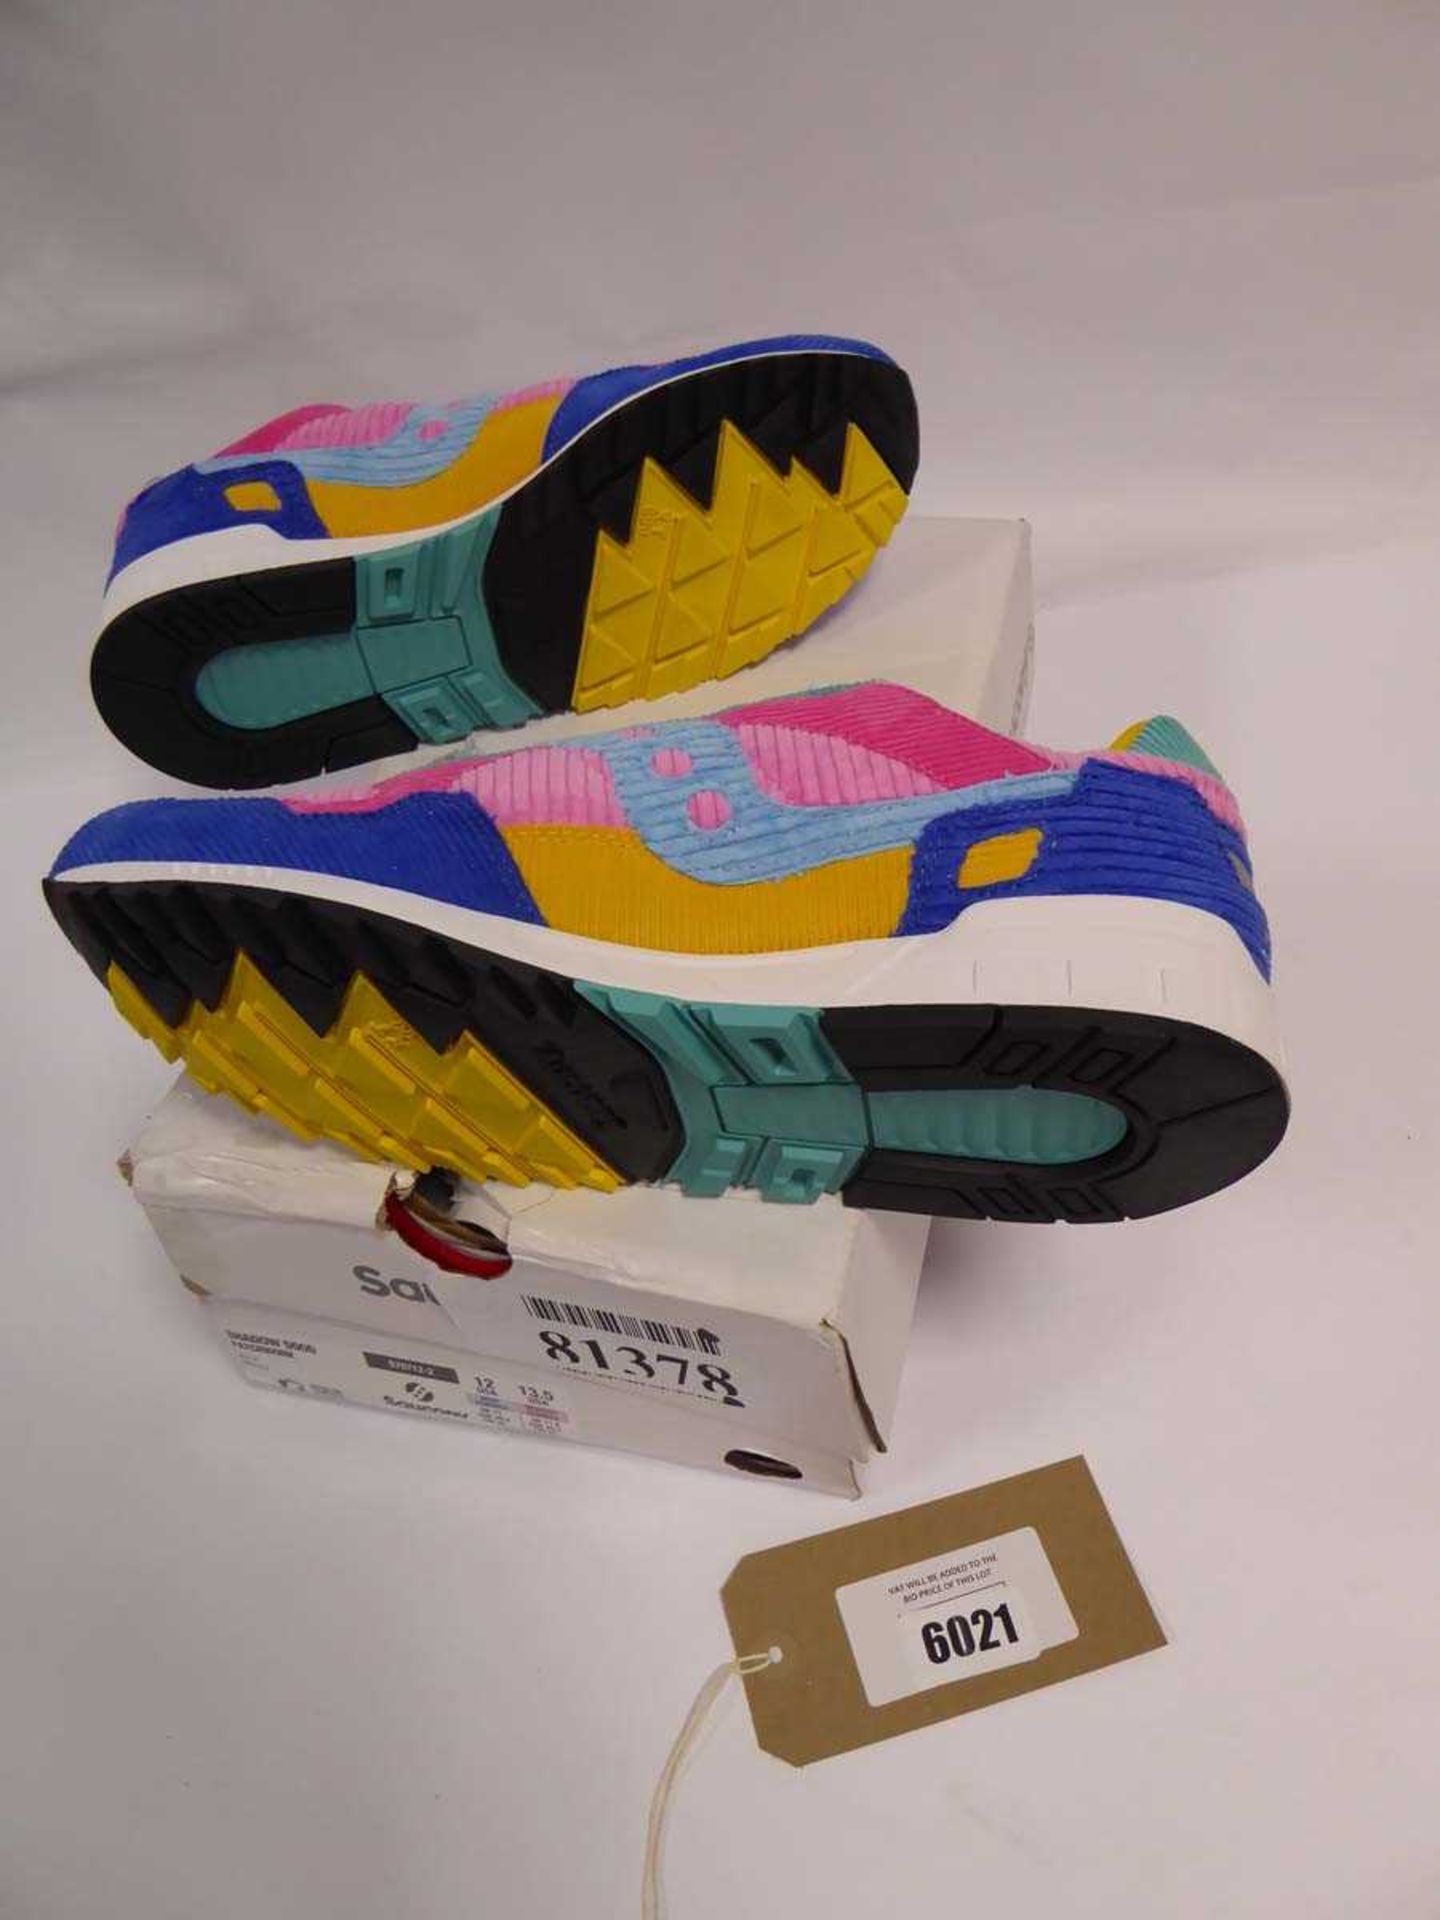 +VAT Boxed pair of Saucony Shadow 5000 patchwork trainers, size 11 (some damage to box) - Image 3 of 3